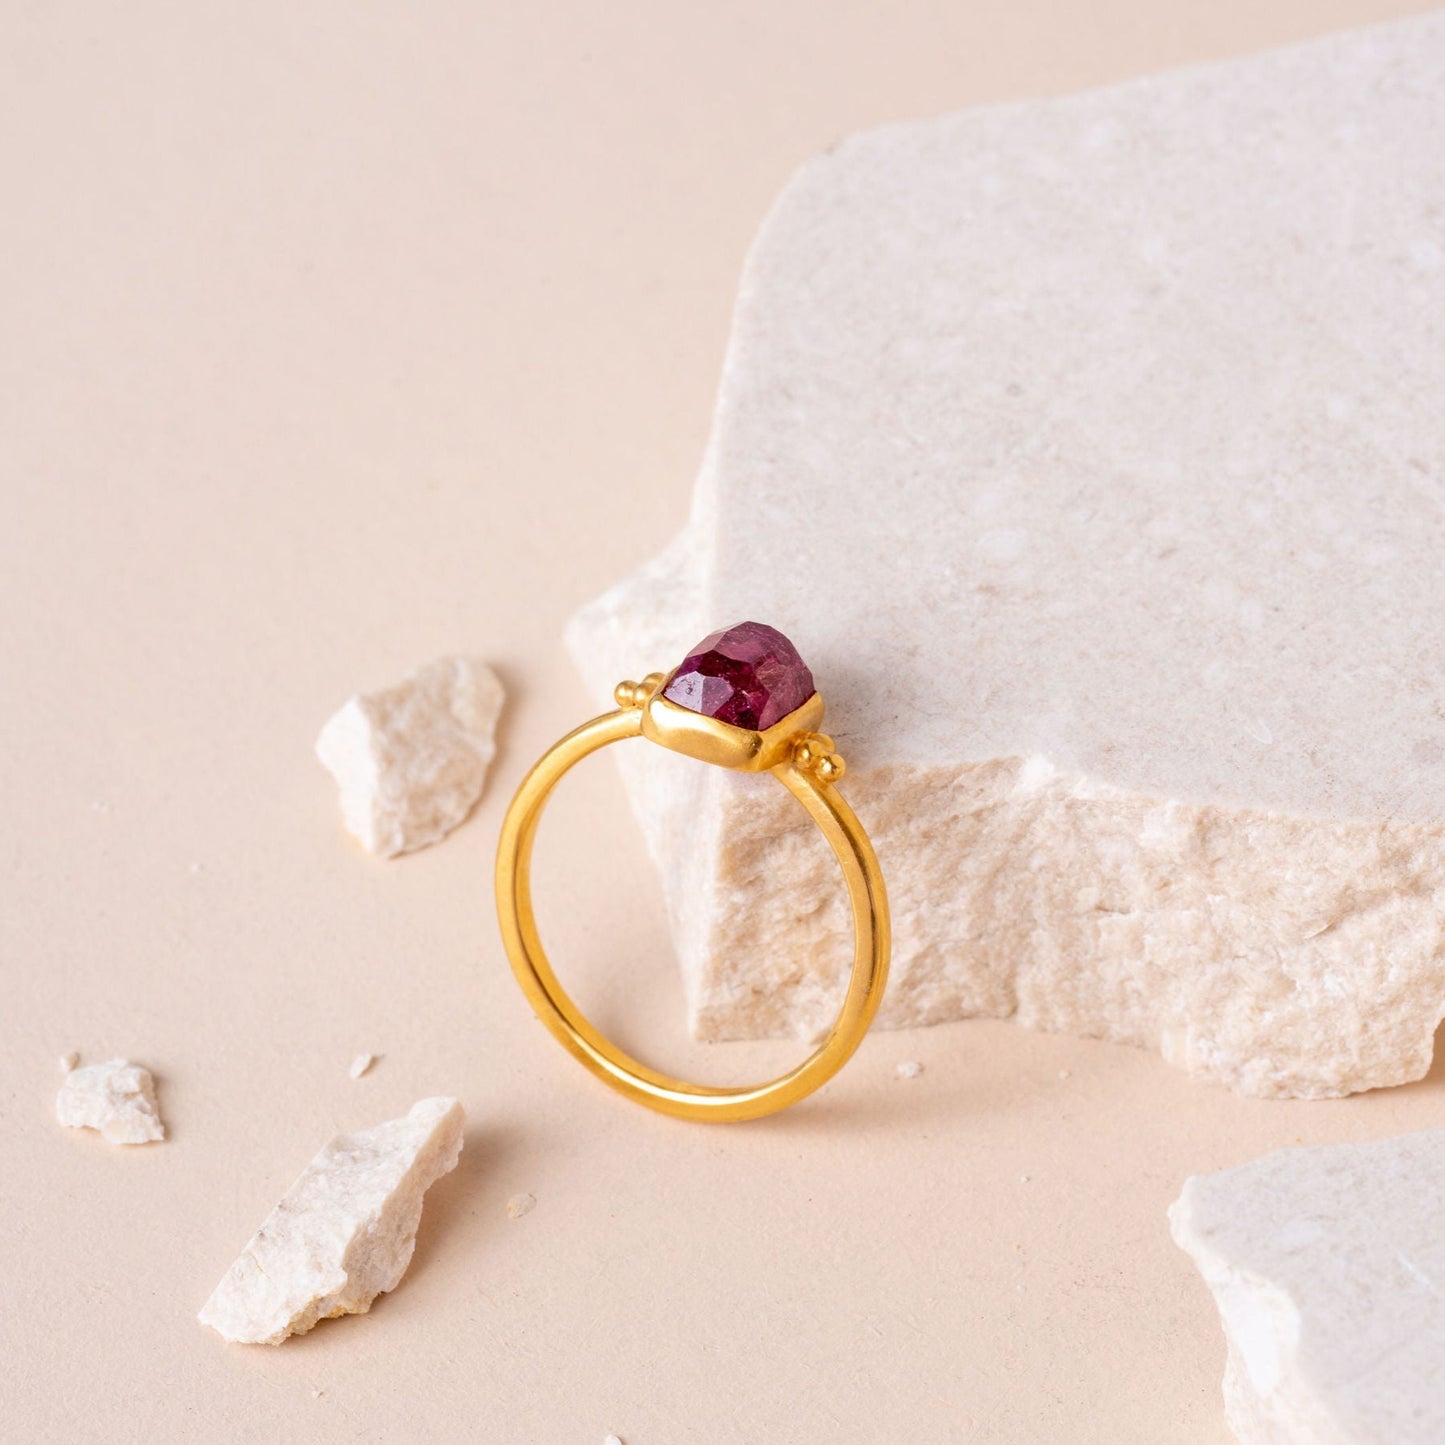 Elegantly crafted gold vermeil ring showcasing a hand-cut pink tourmaline, complemented by intricate granulation detailing on either side.